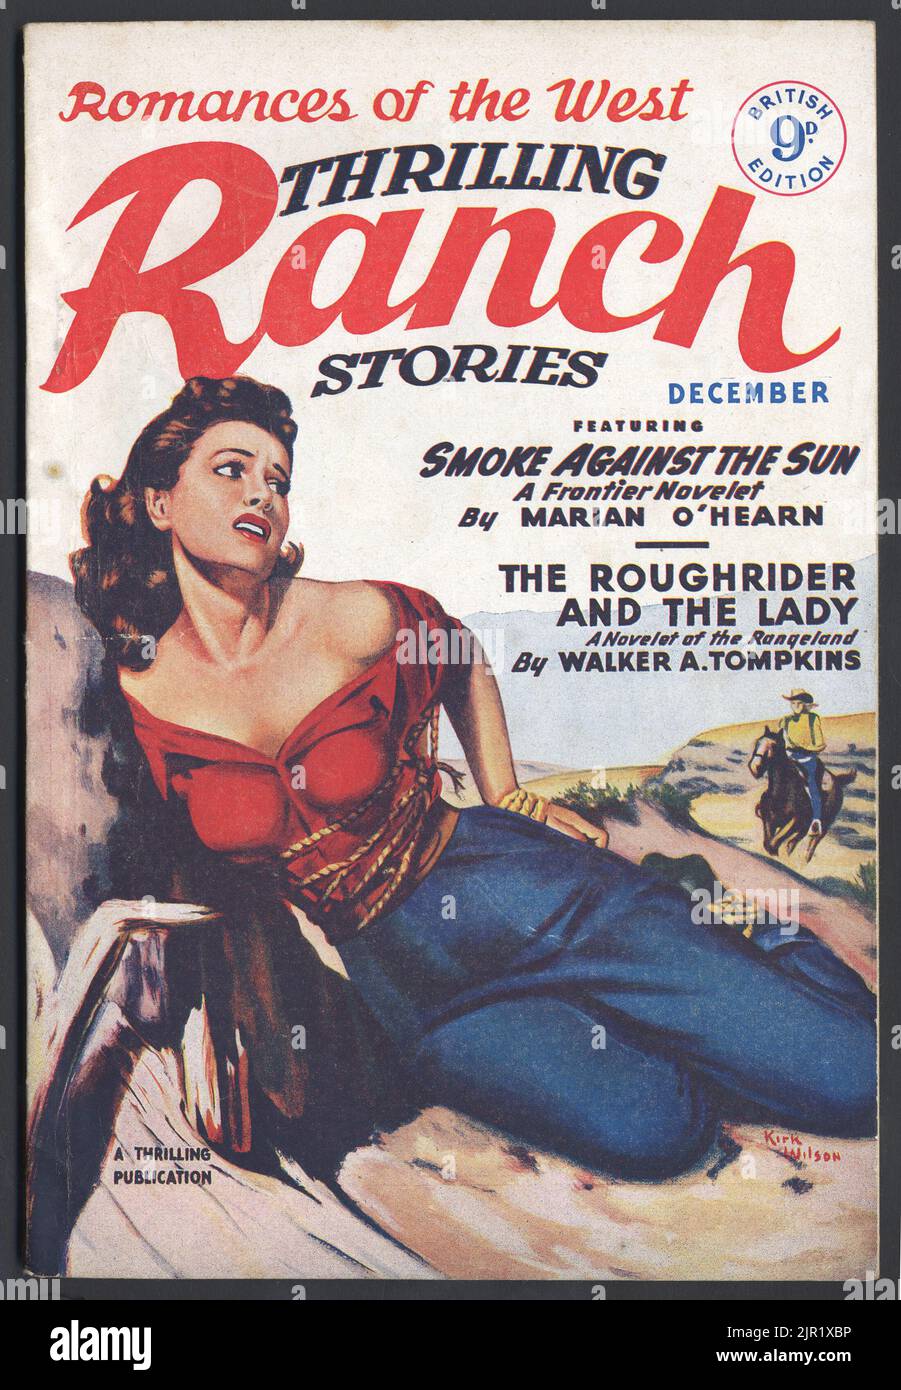 Thrilling Ranch Stories magazine, British Edition, price 9d. January 1951 issue, published monthly. Atlas Publishing, London.  Reprinted from an American original. Cover art Kirk Wilson. These monthly magazines were chock full of serialised short stories, and Thrilling Ranch Stories began in America in 1933.  Some time in the late 1940s Atlas licensed the rights for Britain, and the magazines were reproduced more or less exactly, although the covers were copied so had a coarser print screen.  They followed a couple of months behind the American release. Stock Photo